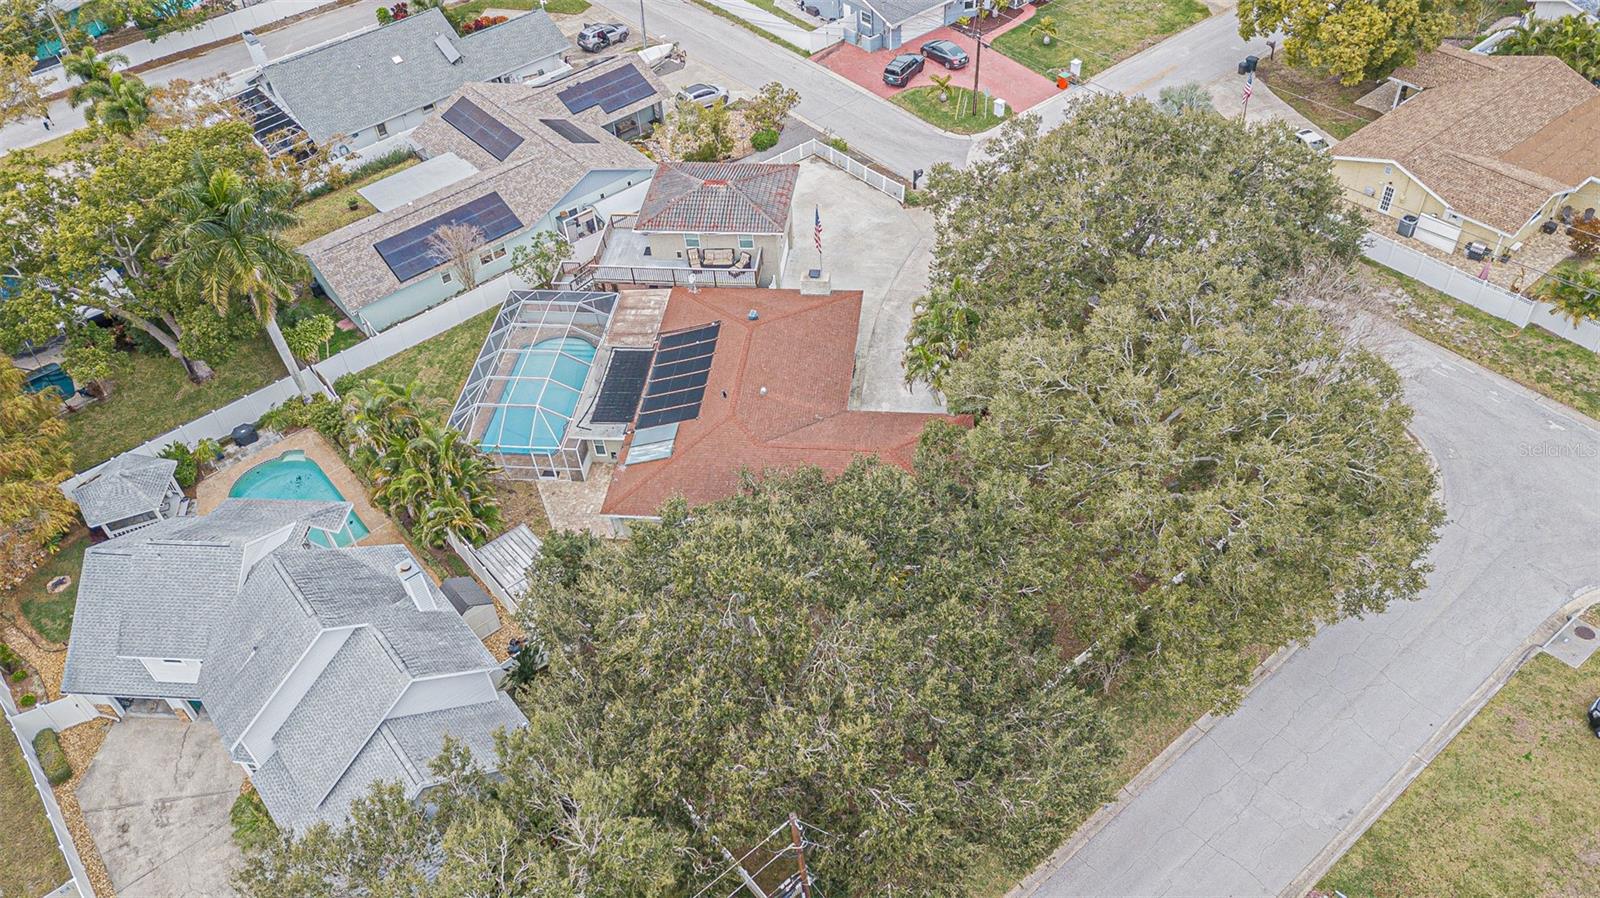 aerial shot of your entire lot area (roof has been